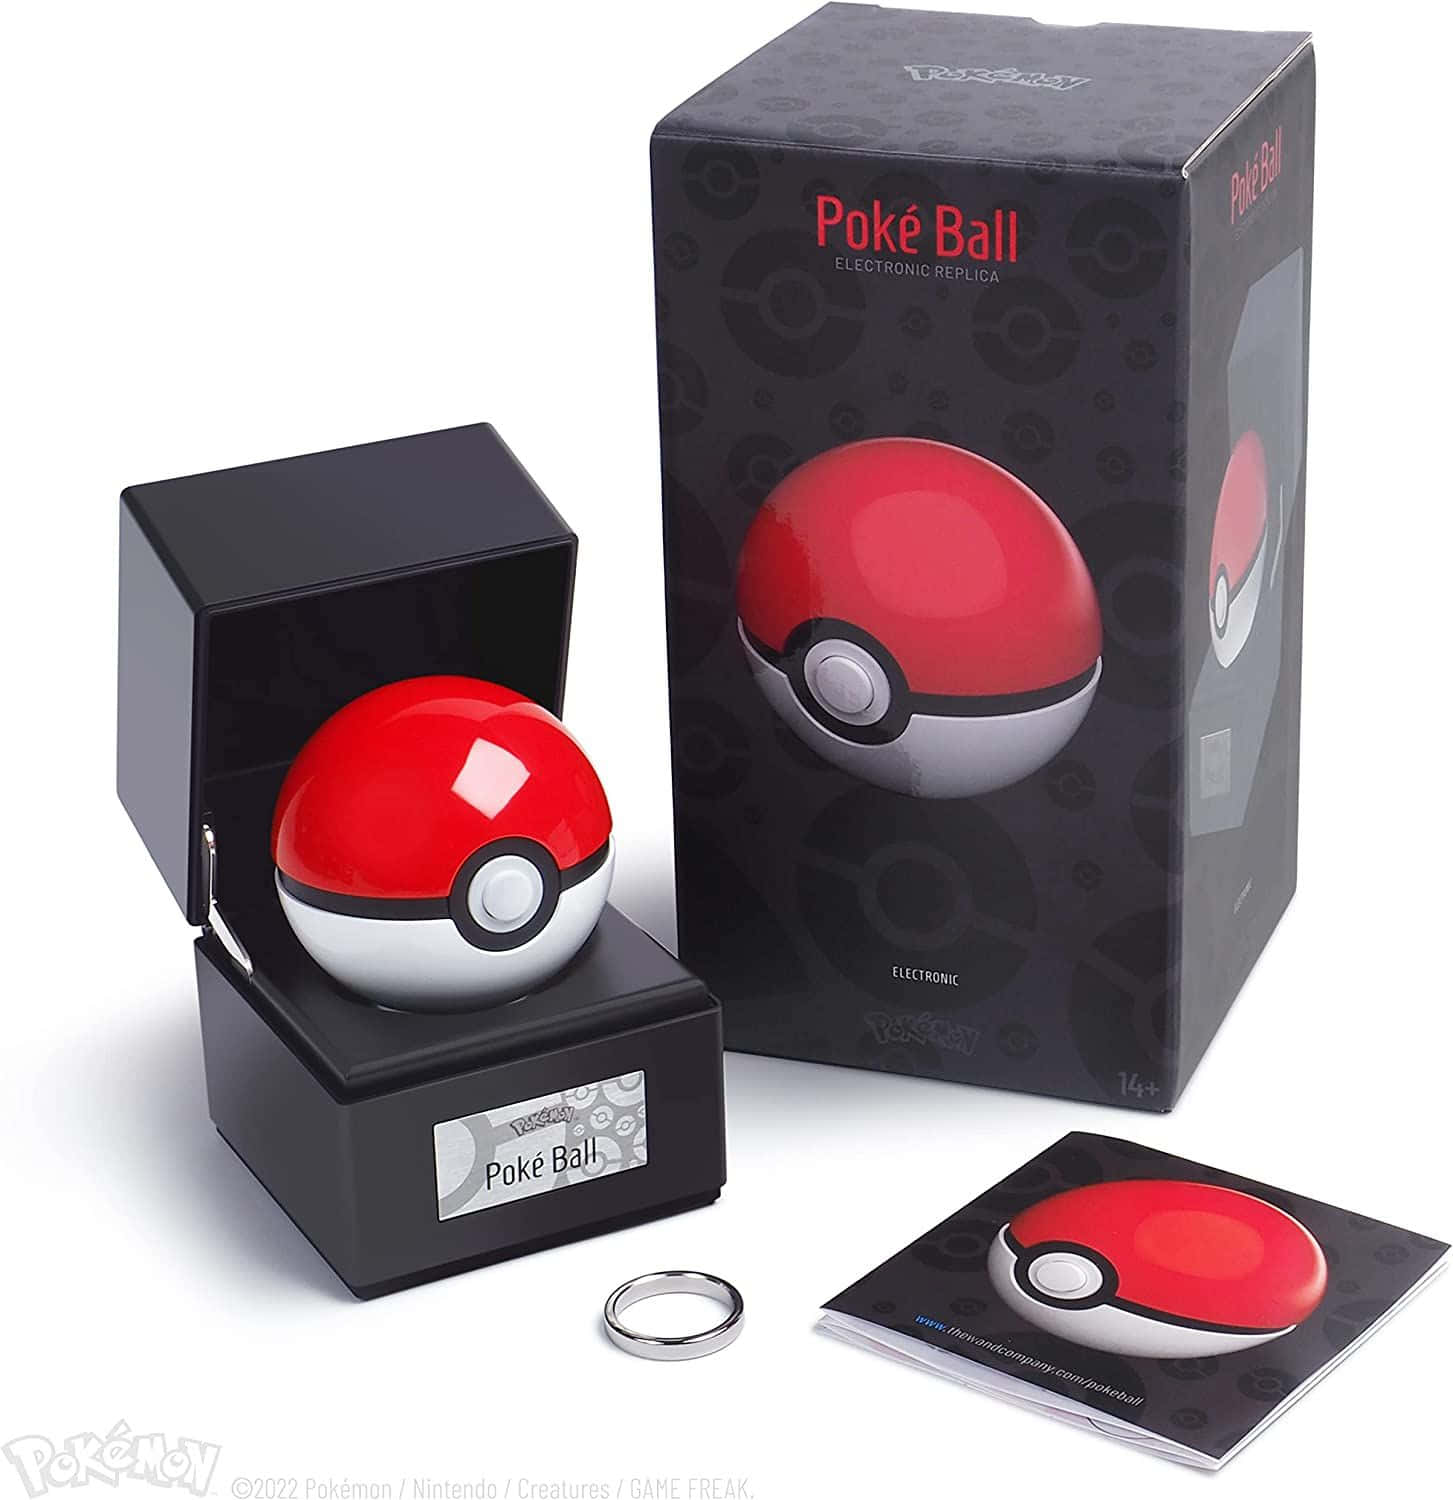 "The perfect tool to capture and battle Pokemon with"